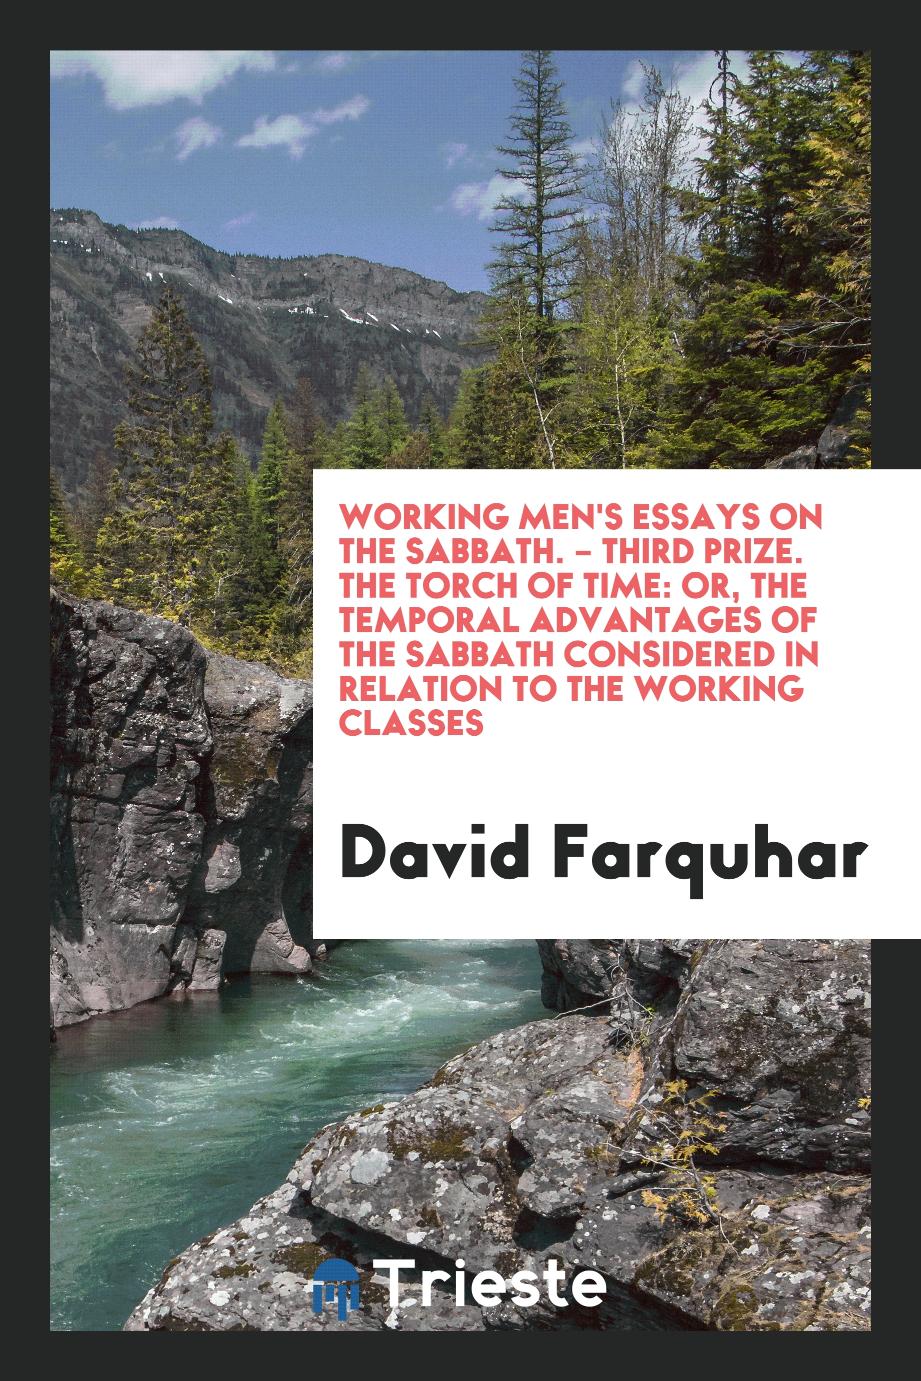 Working Men's Essays on the Sabbath. – Third Prize. The Torch of Time: Or, the Temporal Advantages of the Sabbath Considered in Relation to the Working Classes